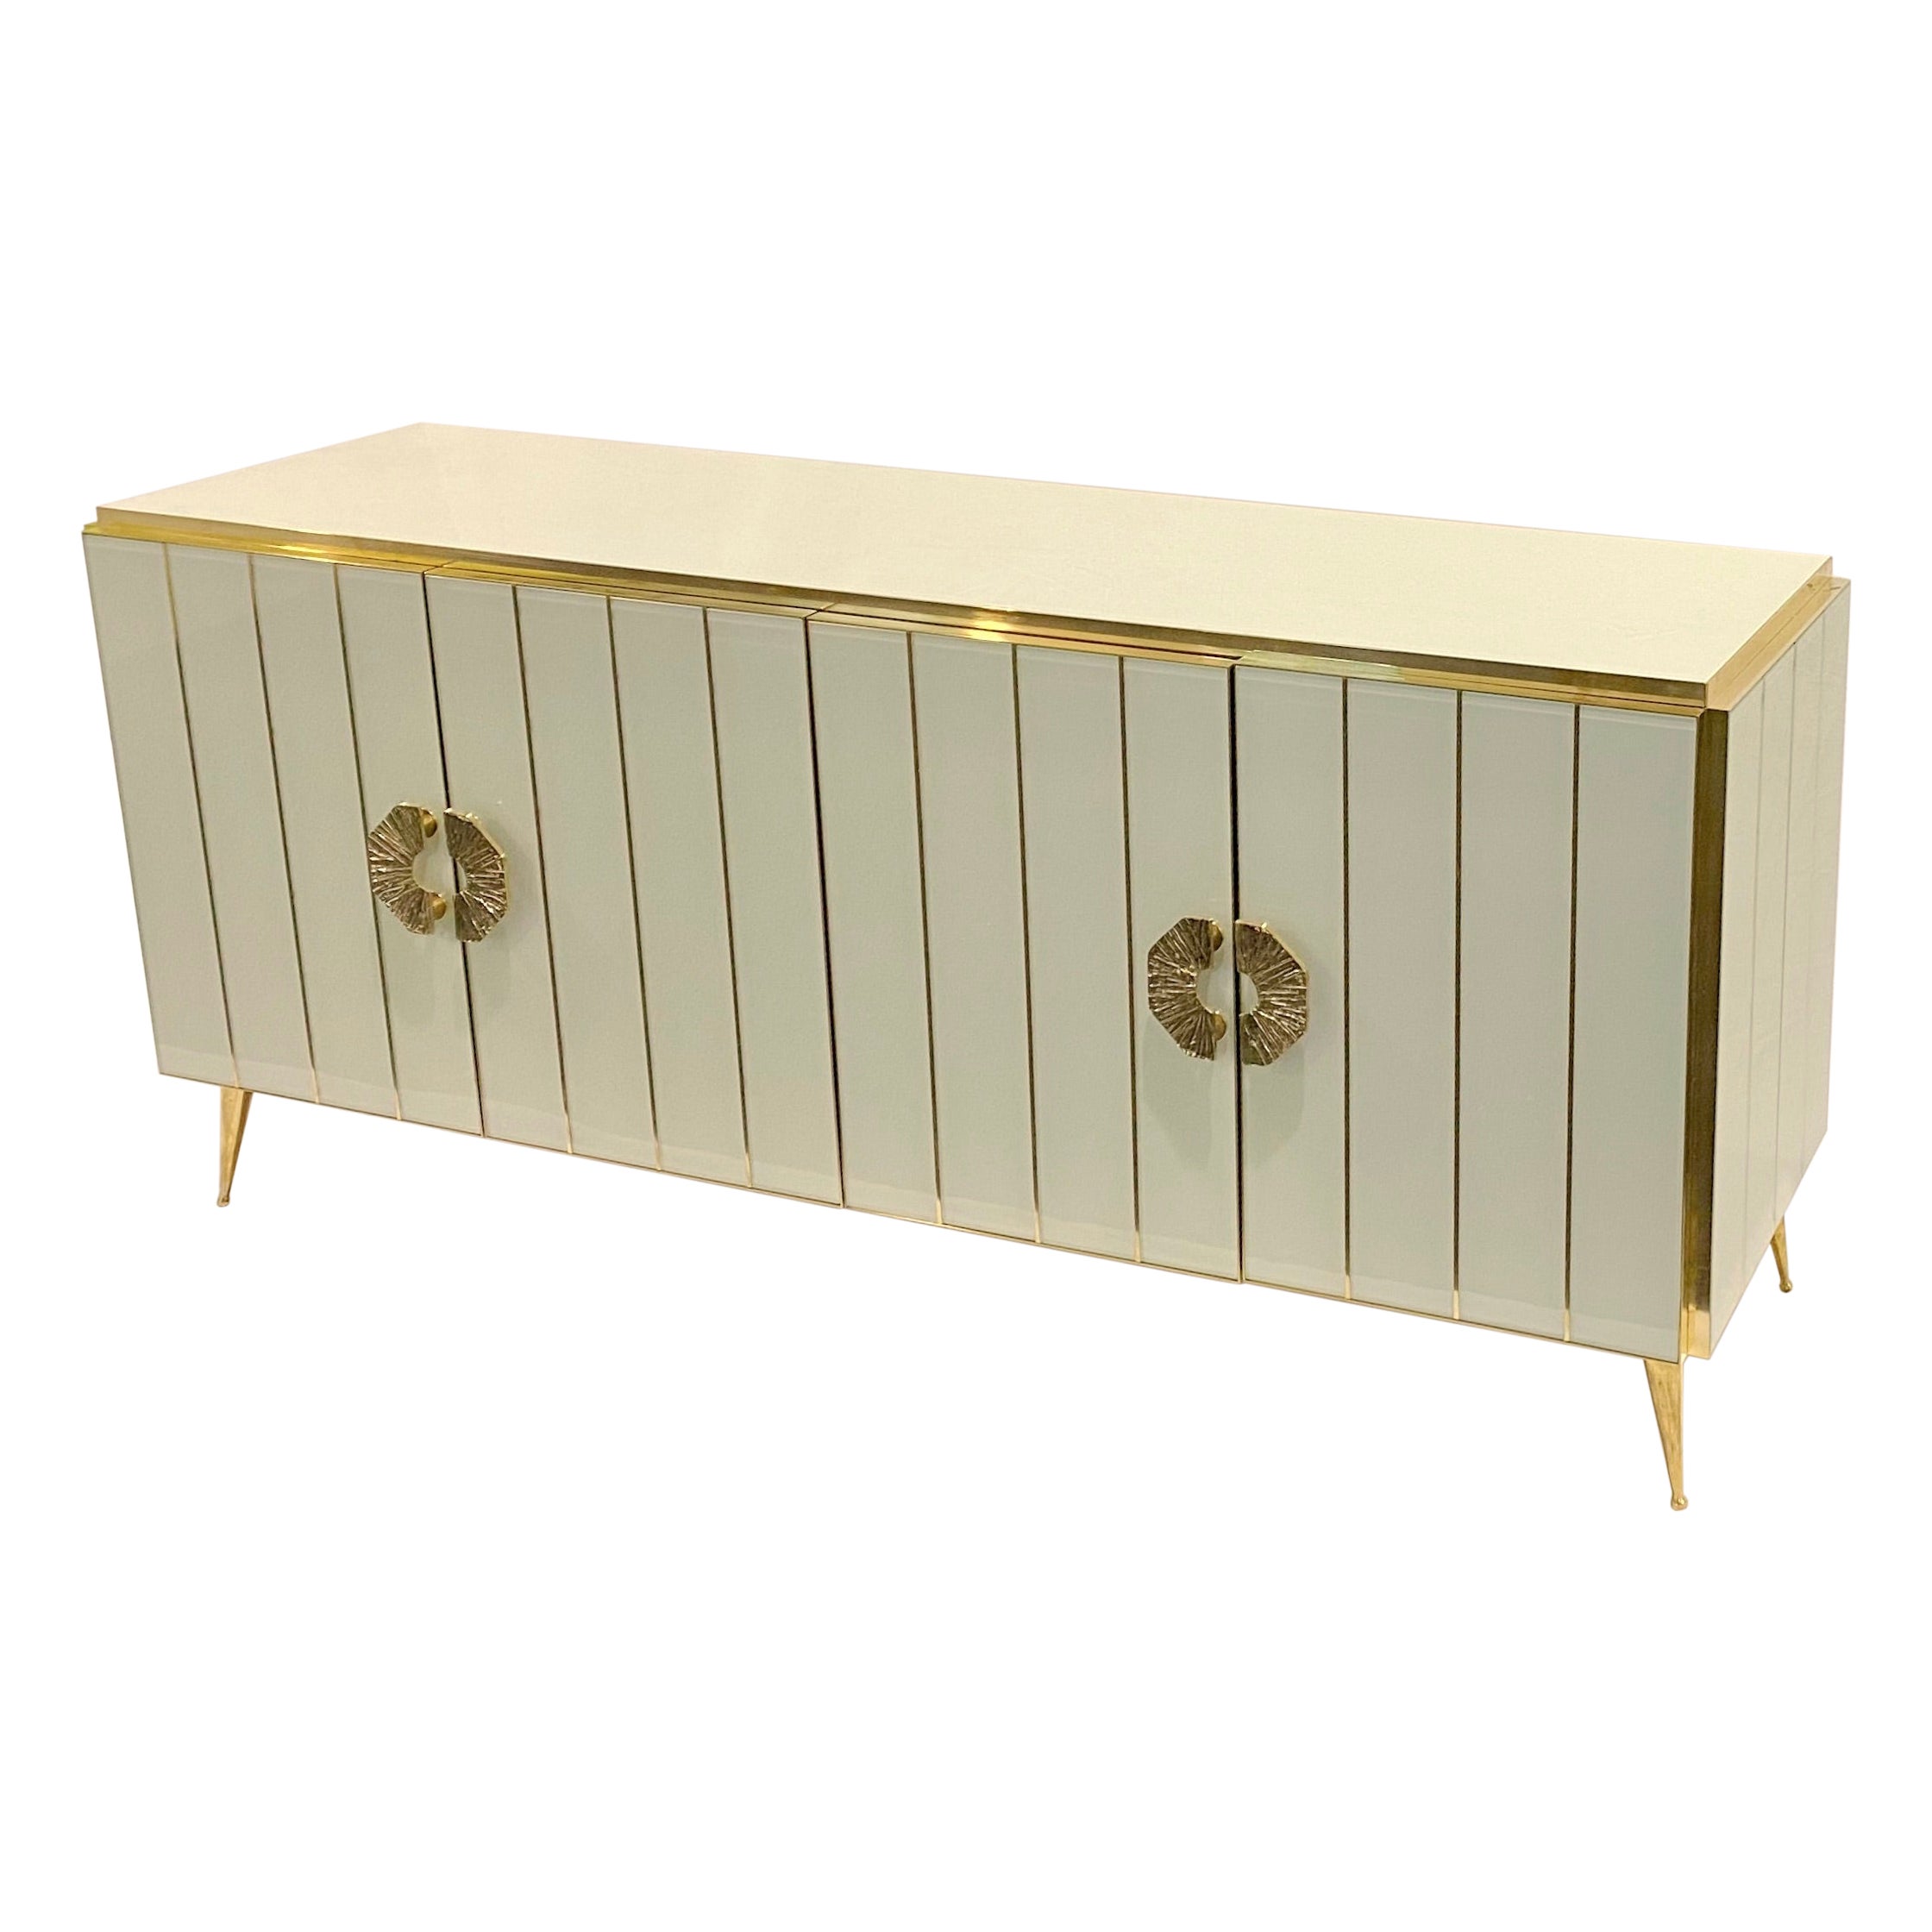 Cosulich Interiors & Antiques Sideboards